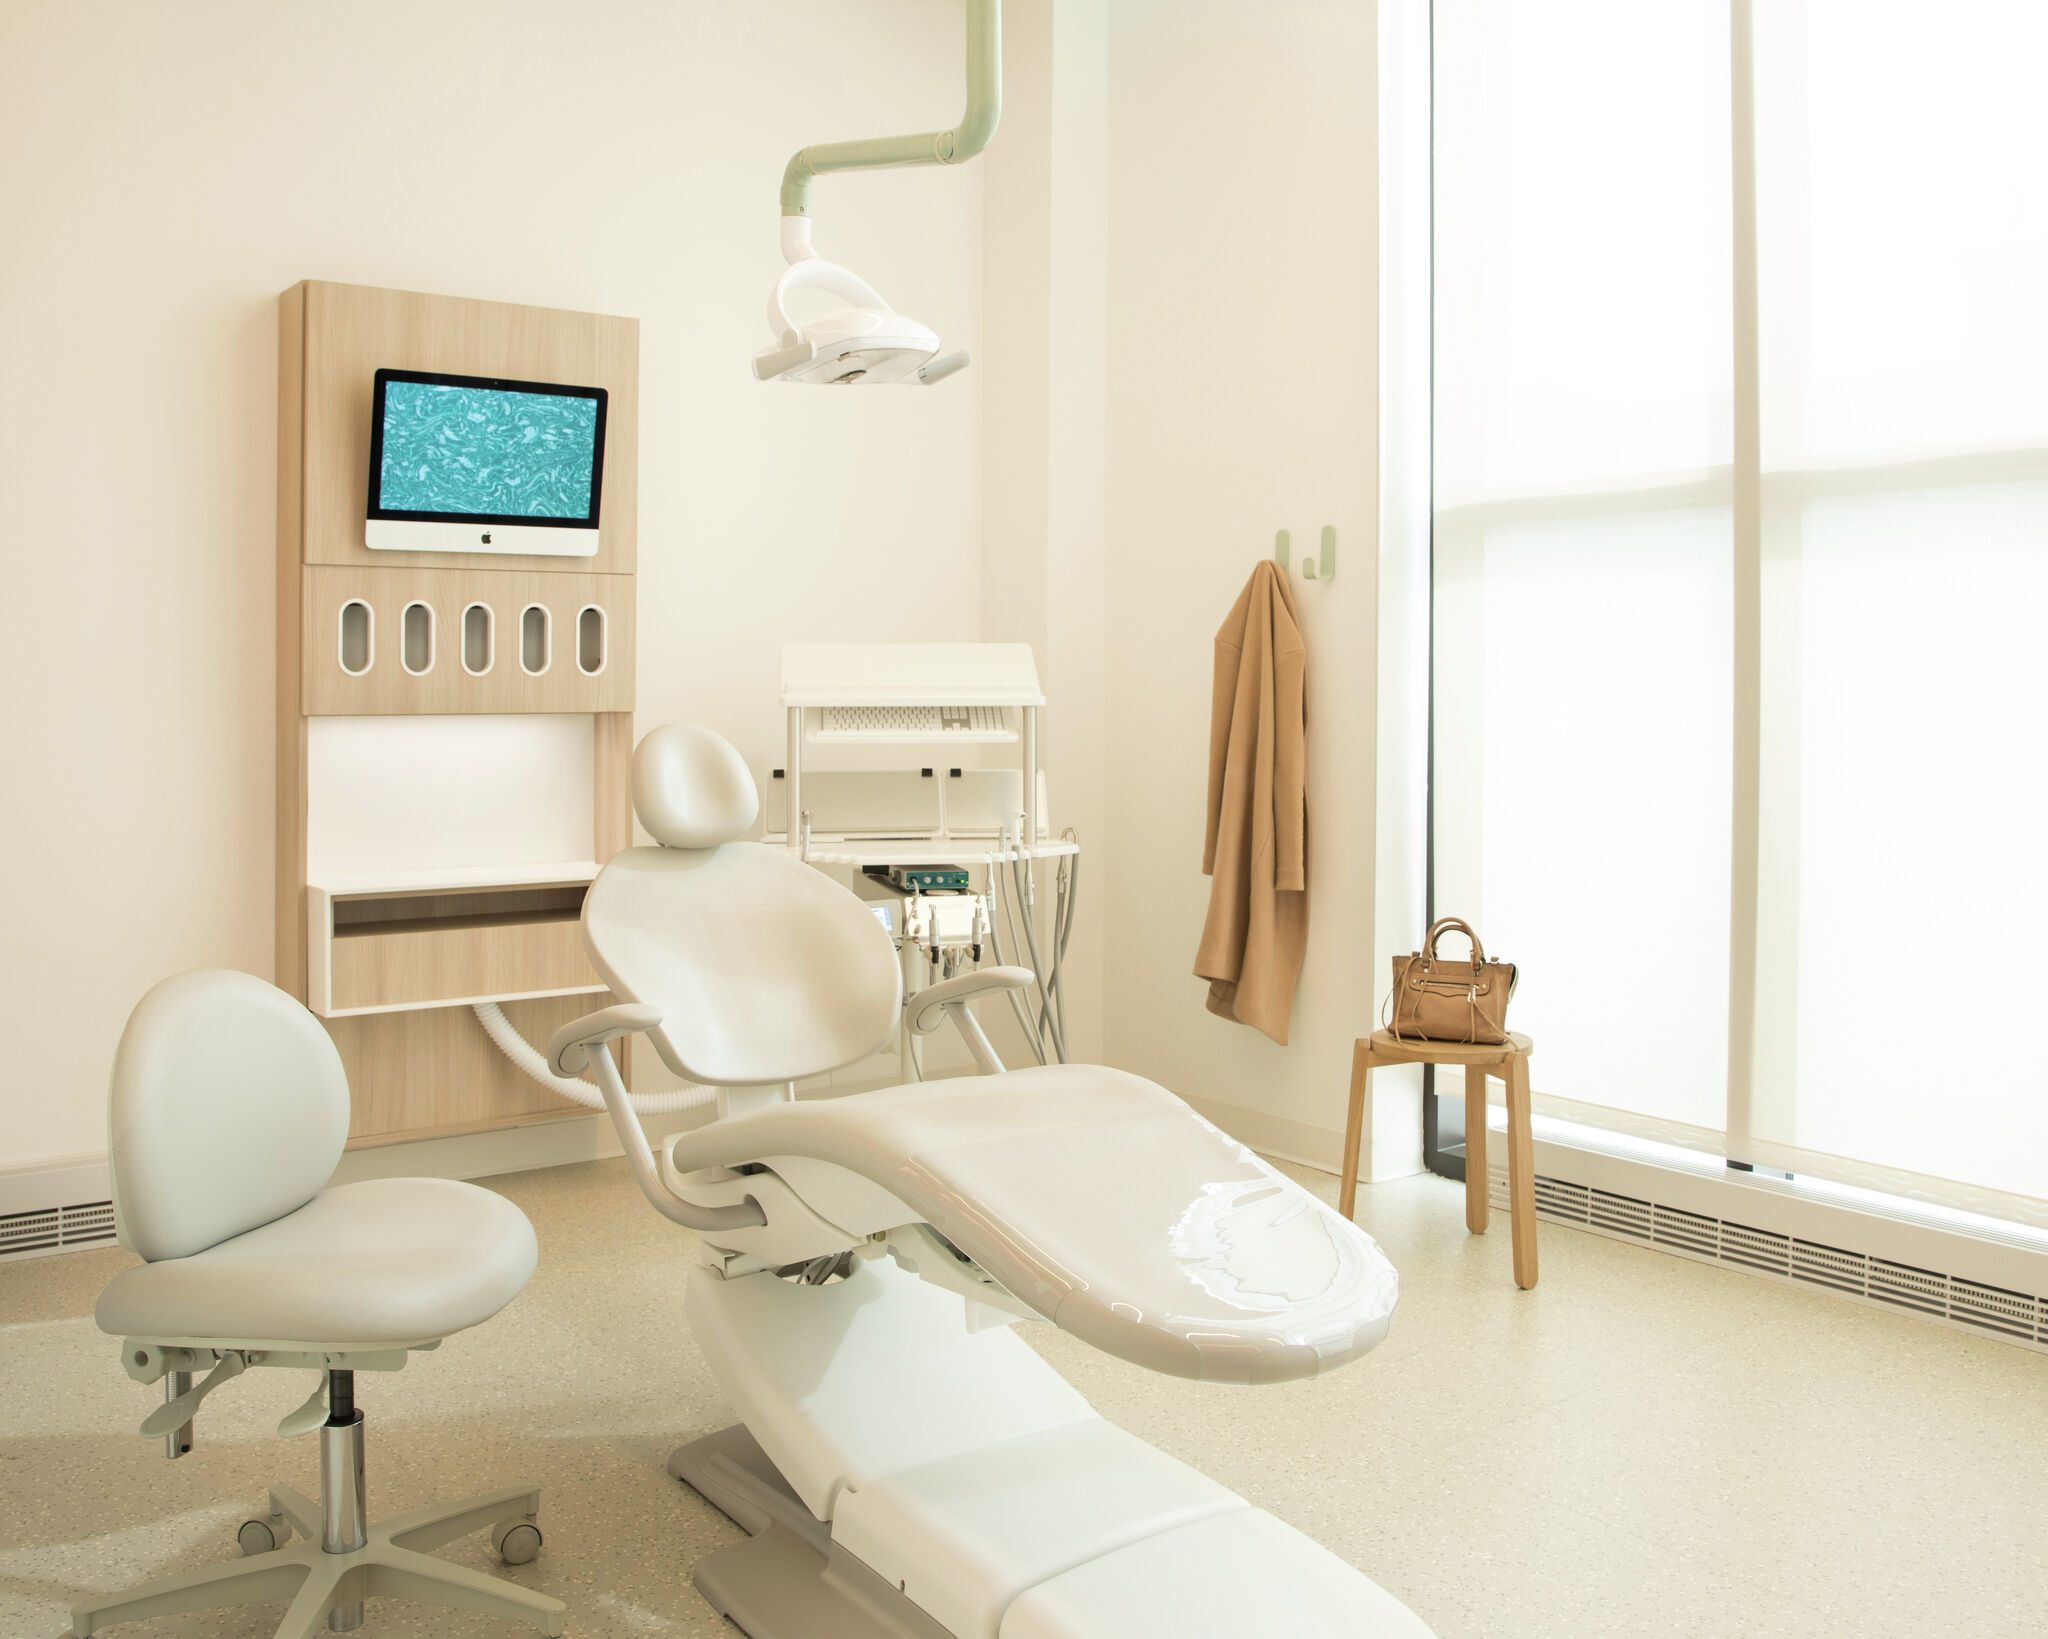 New dentist corporation is opening its 1st CT spot in Westport